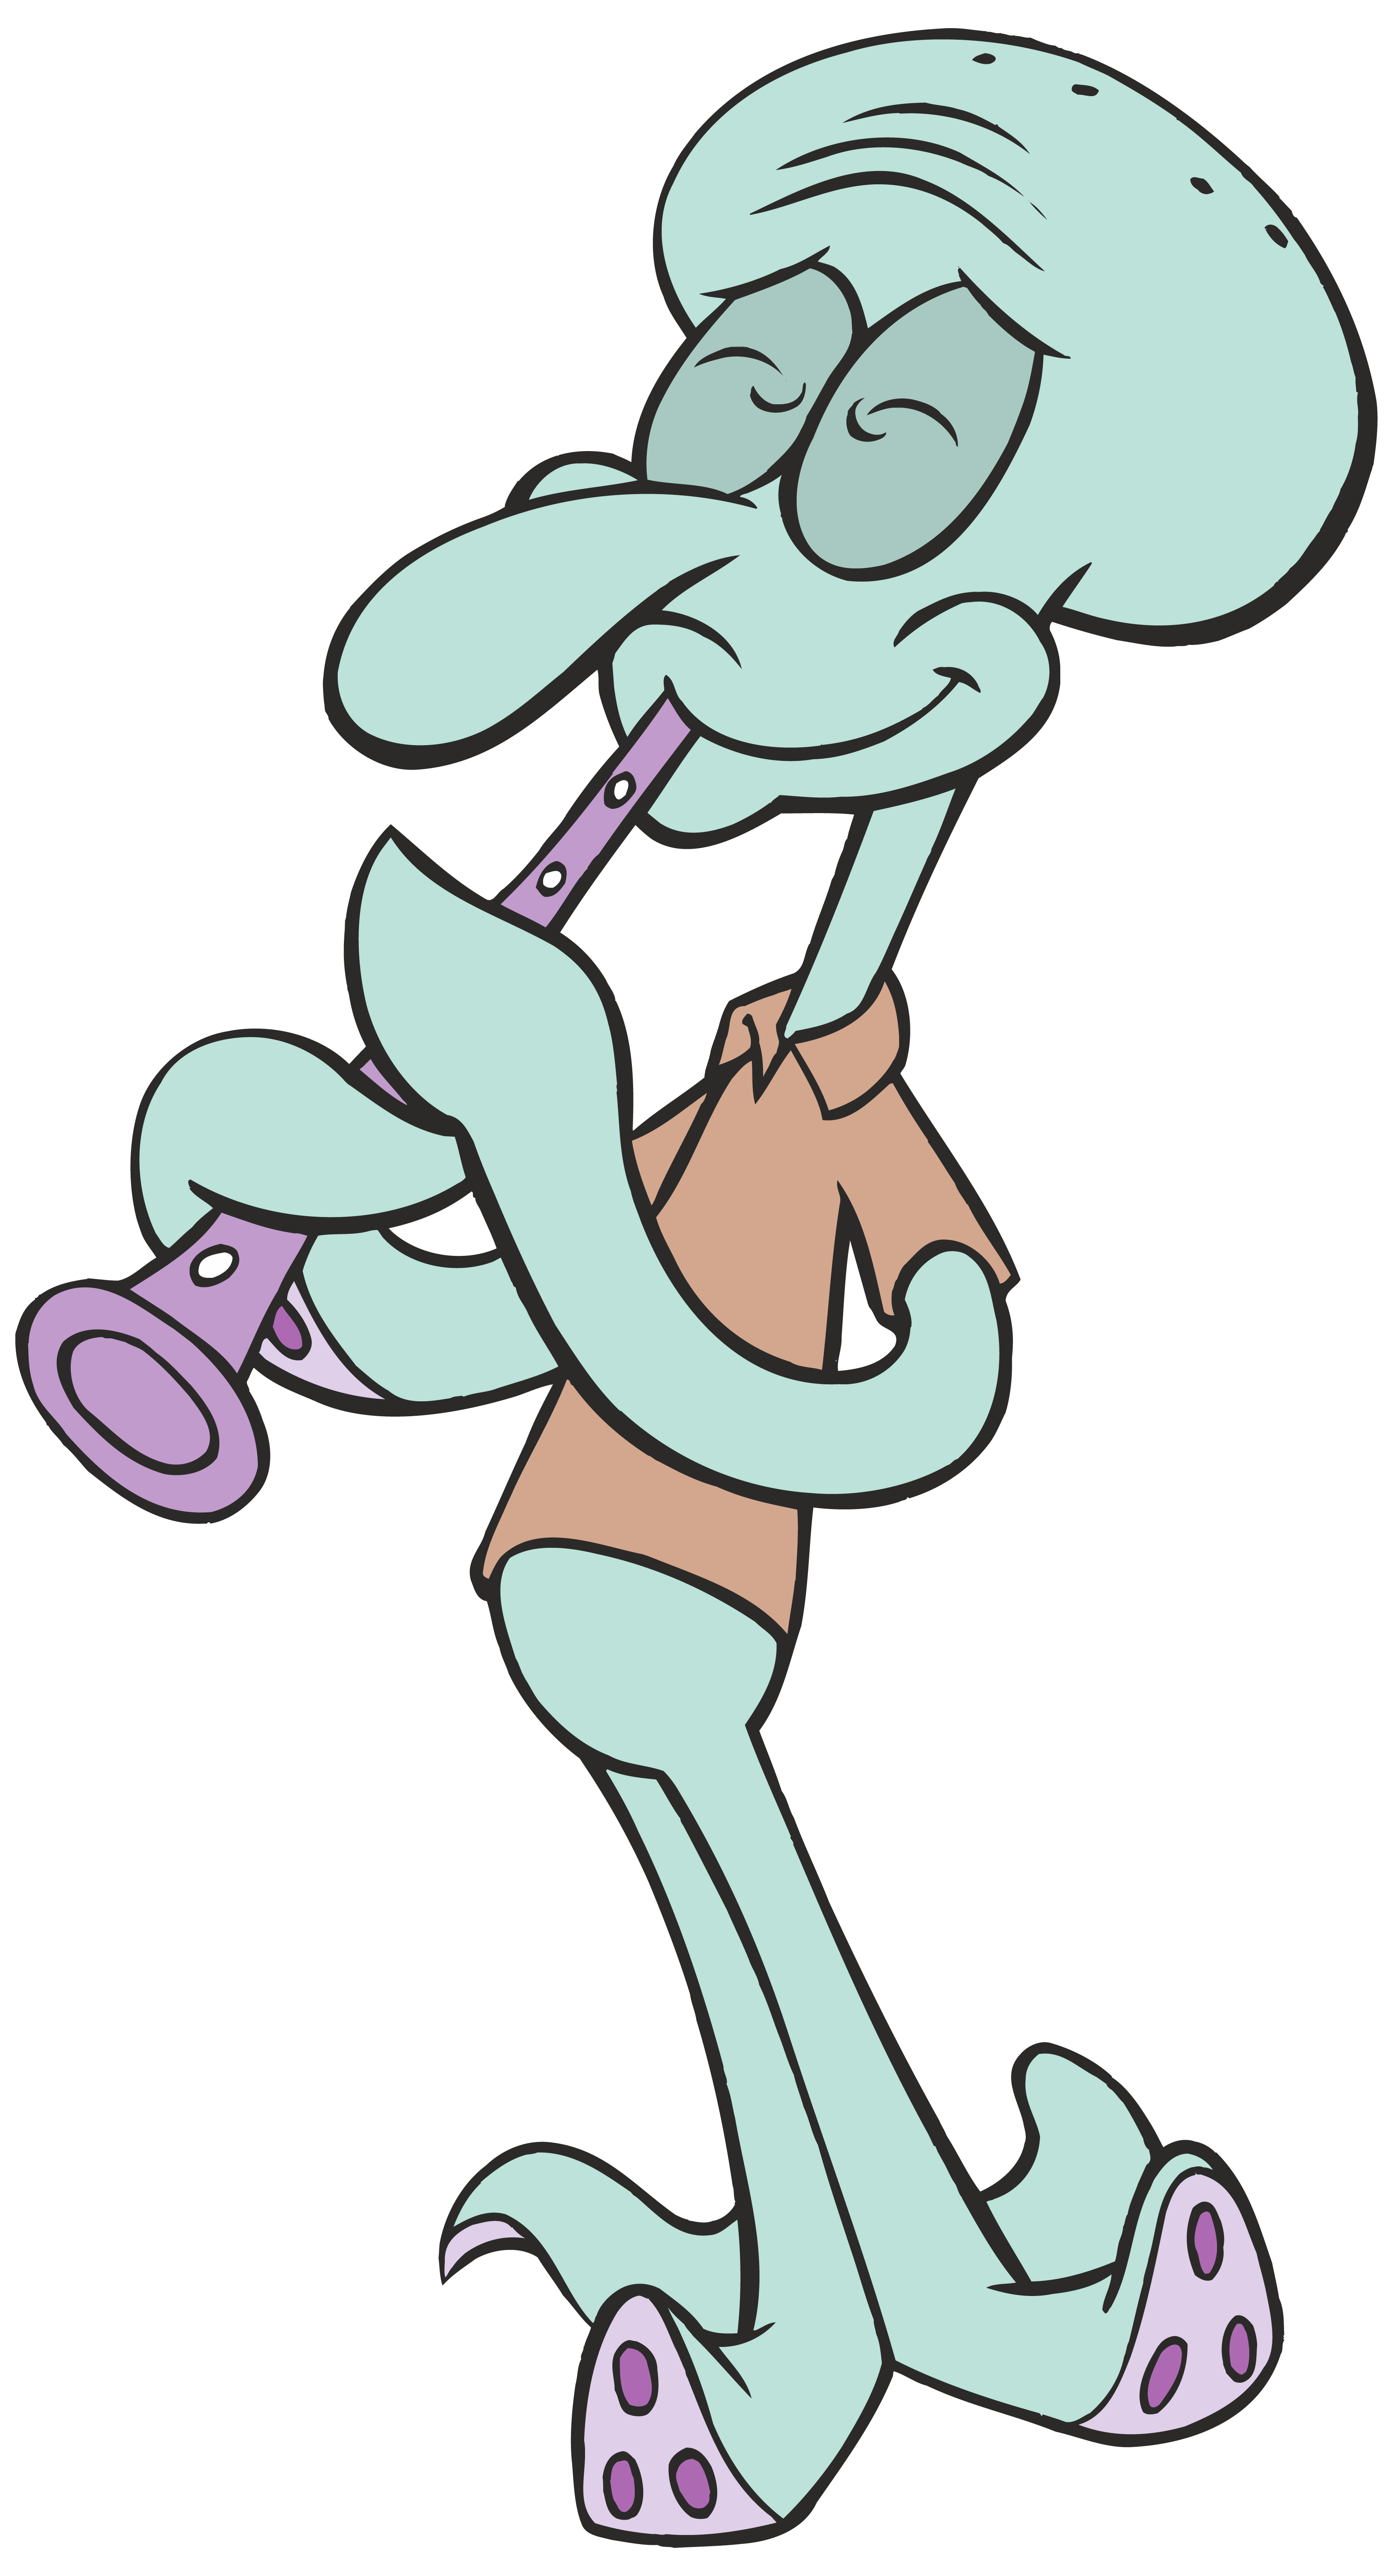 Squidward tentacles spongebob png. Excited clipart eager